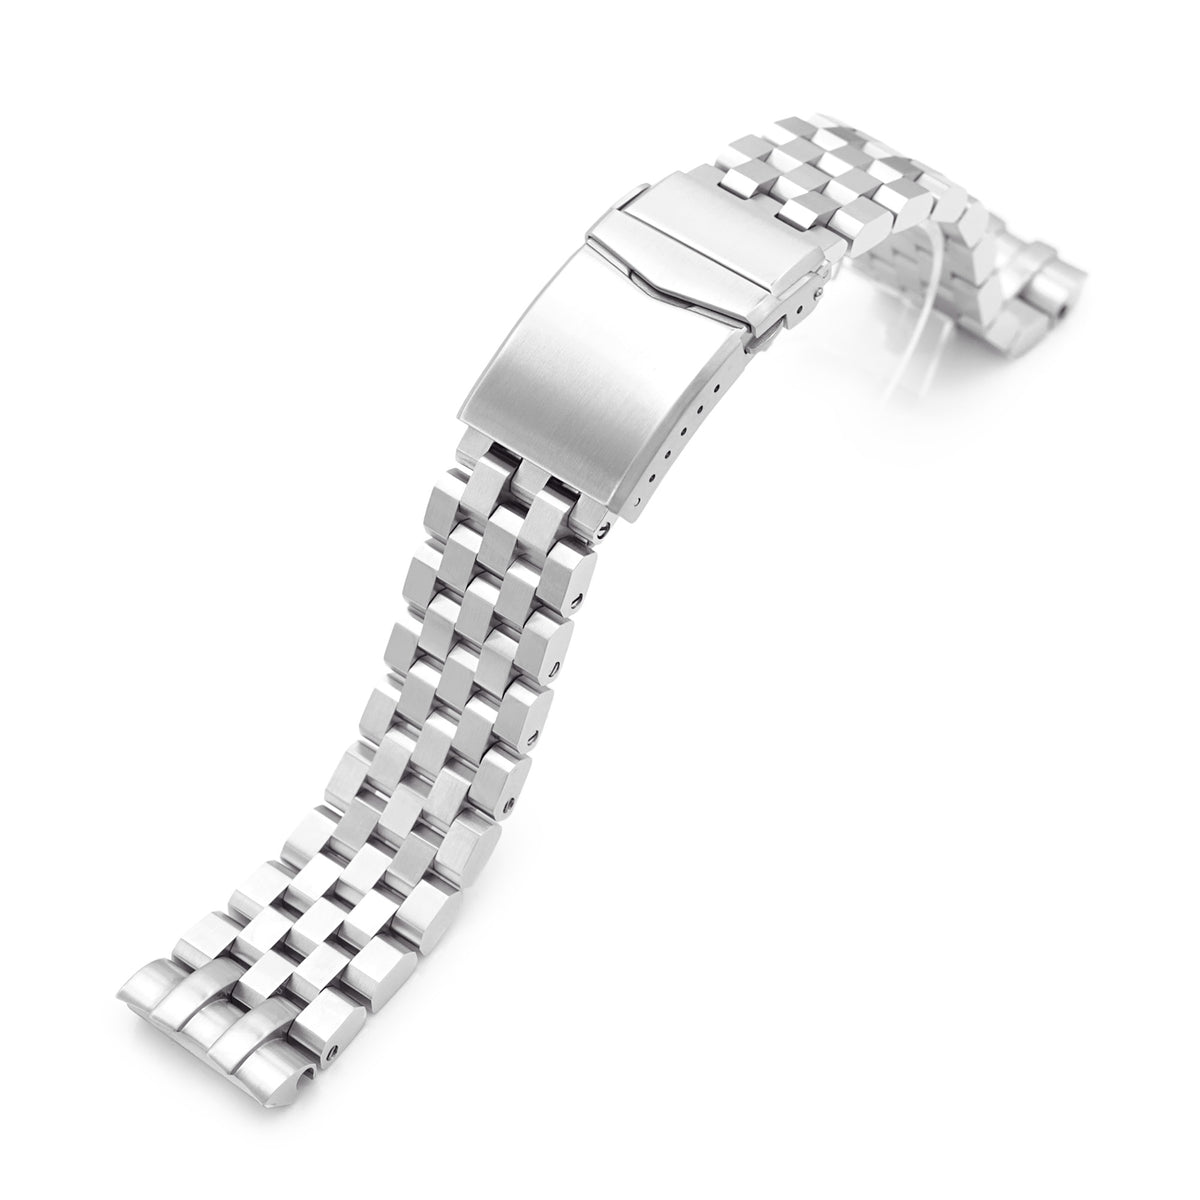 22mm Super Engineer II 316L Stainless Steel Watch Bracelet for Seiko New Turtles SRP777 &amp; PADI SRPA21 V-Clasp Button Double Loc Strapcode Watch Bands